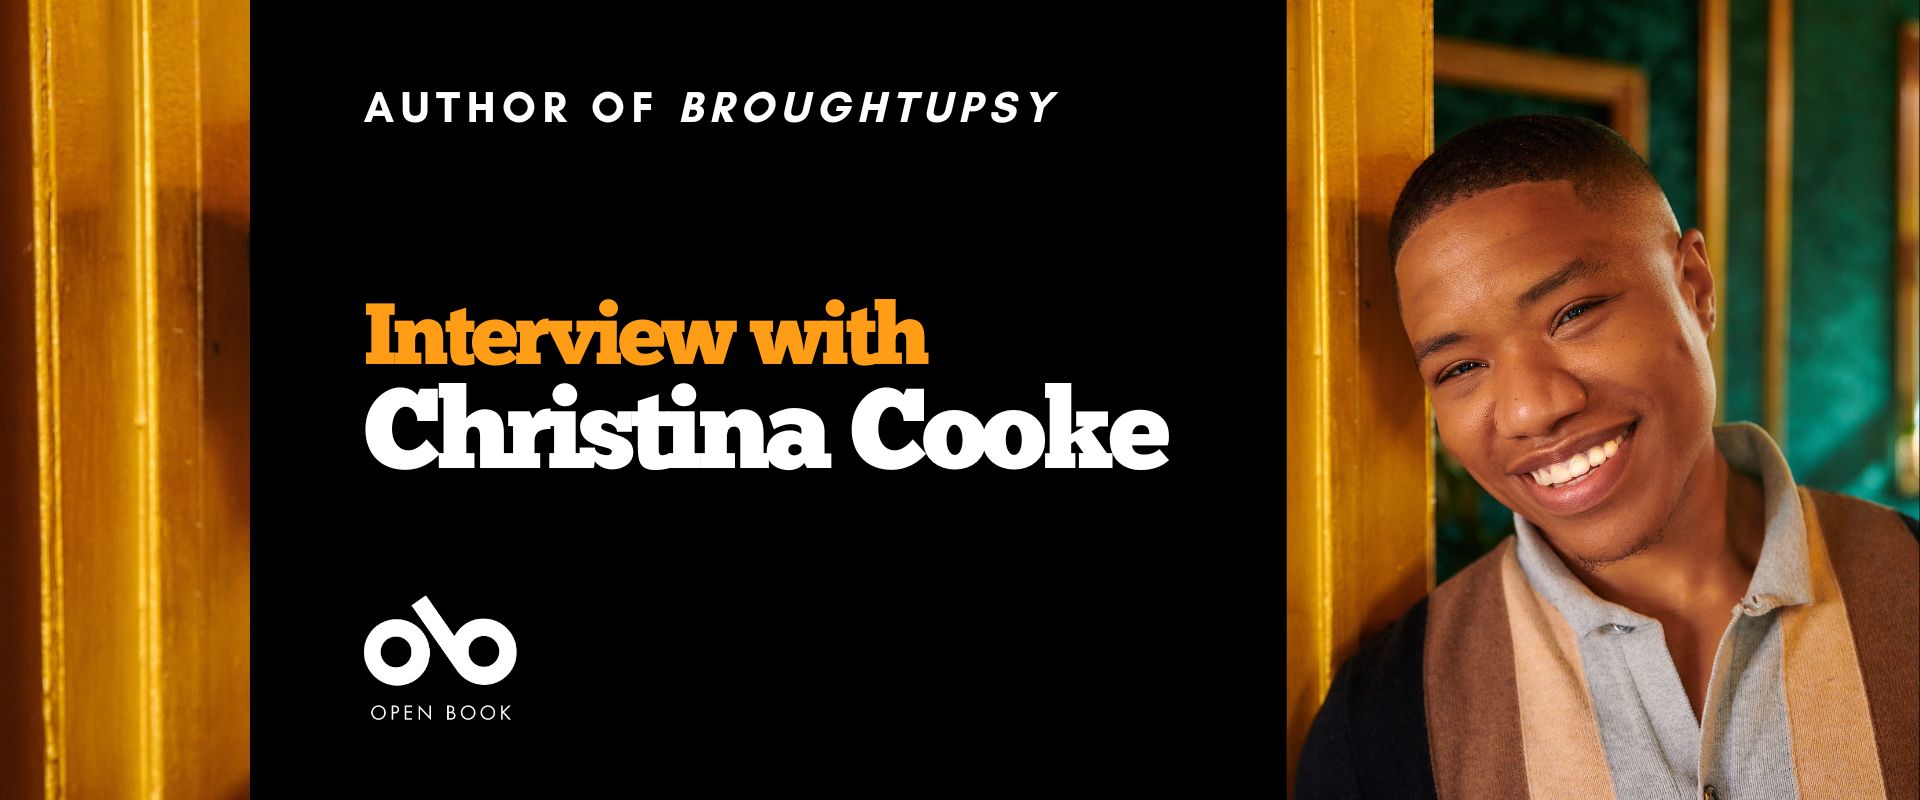 Banner image with photo of author Christina Cooke smiling on the right. Text on a black background on the left reads Author of Broughtupsy interview with Christina Cooke. Open Book logo bottom left.